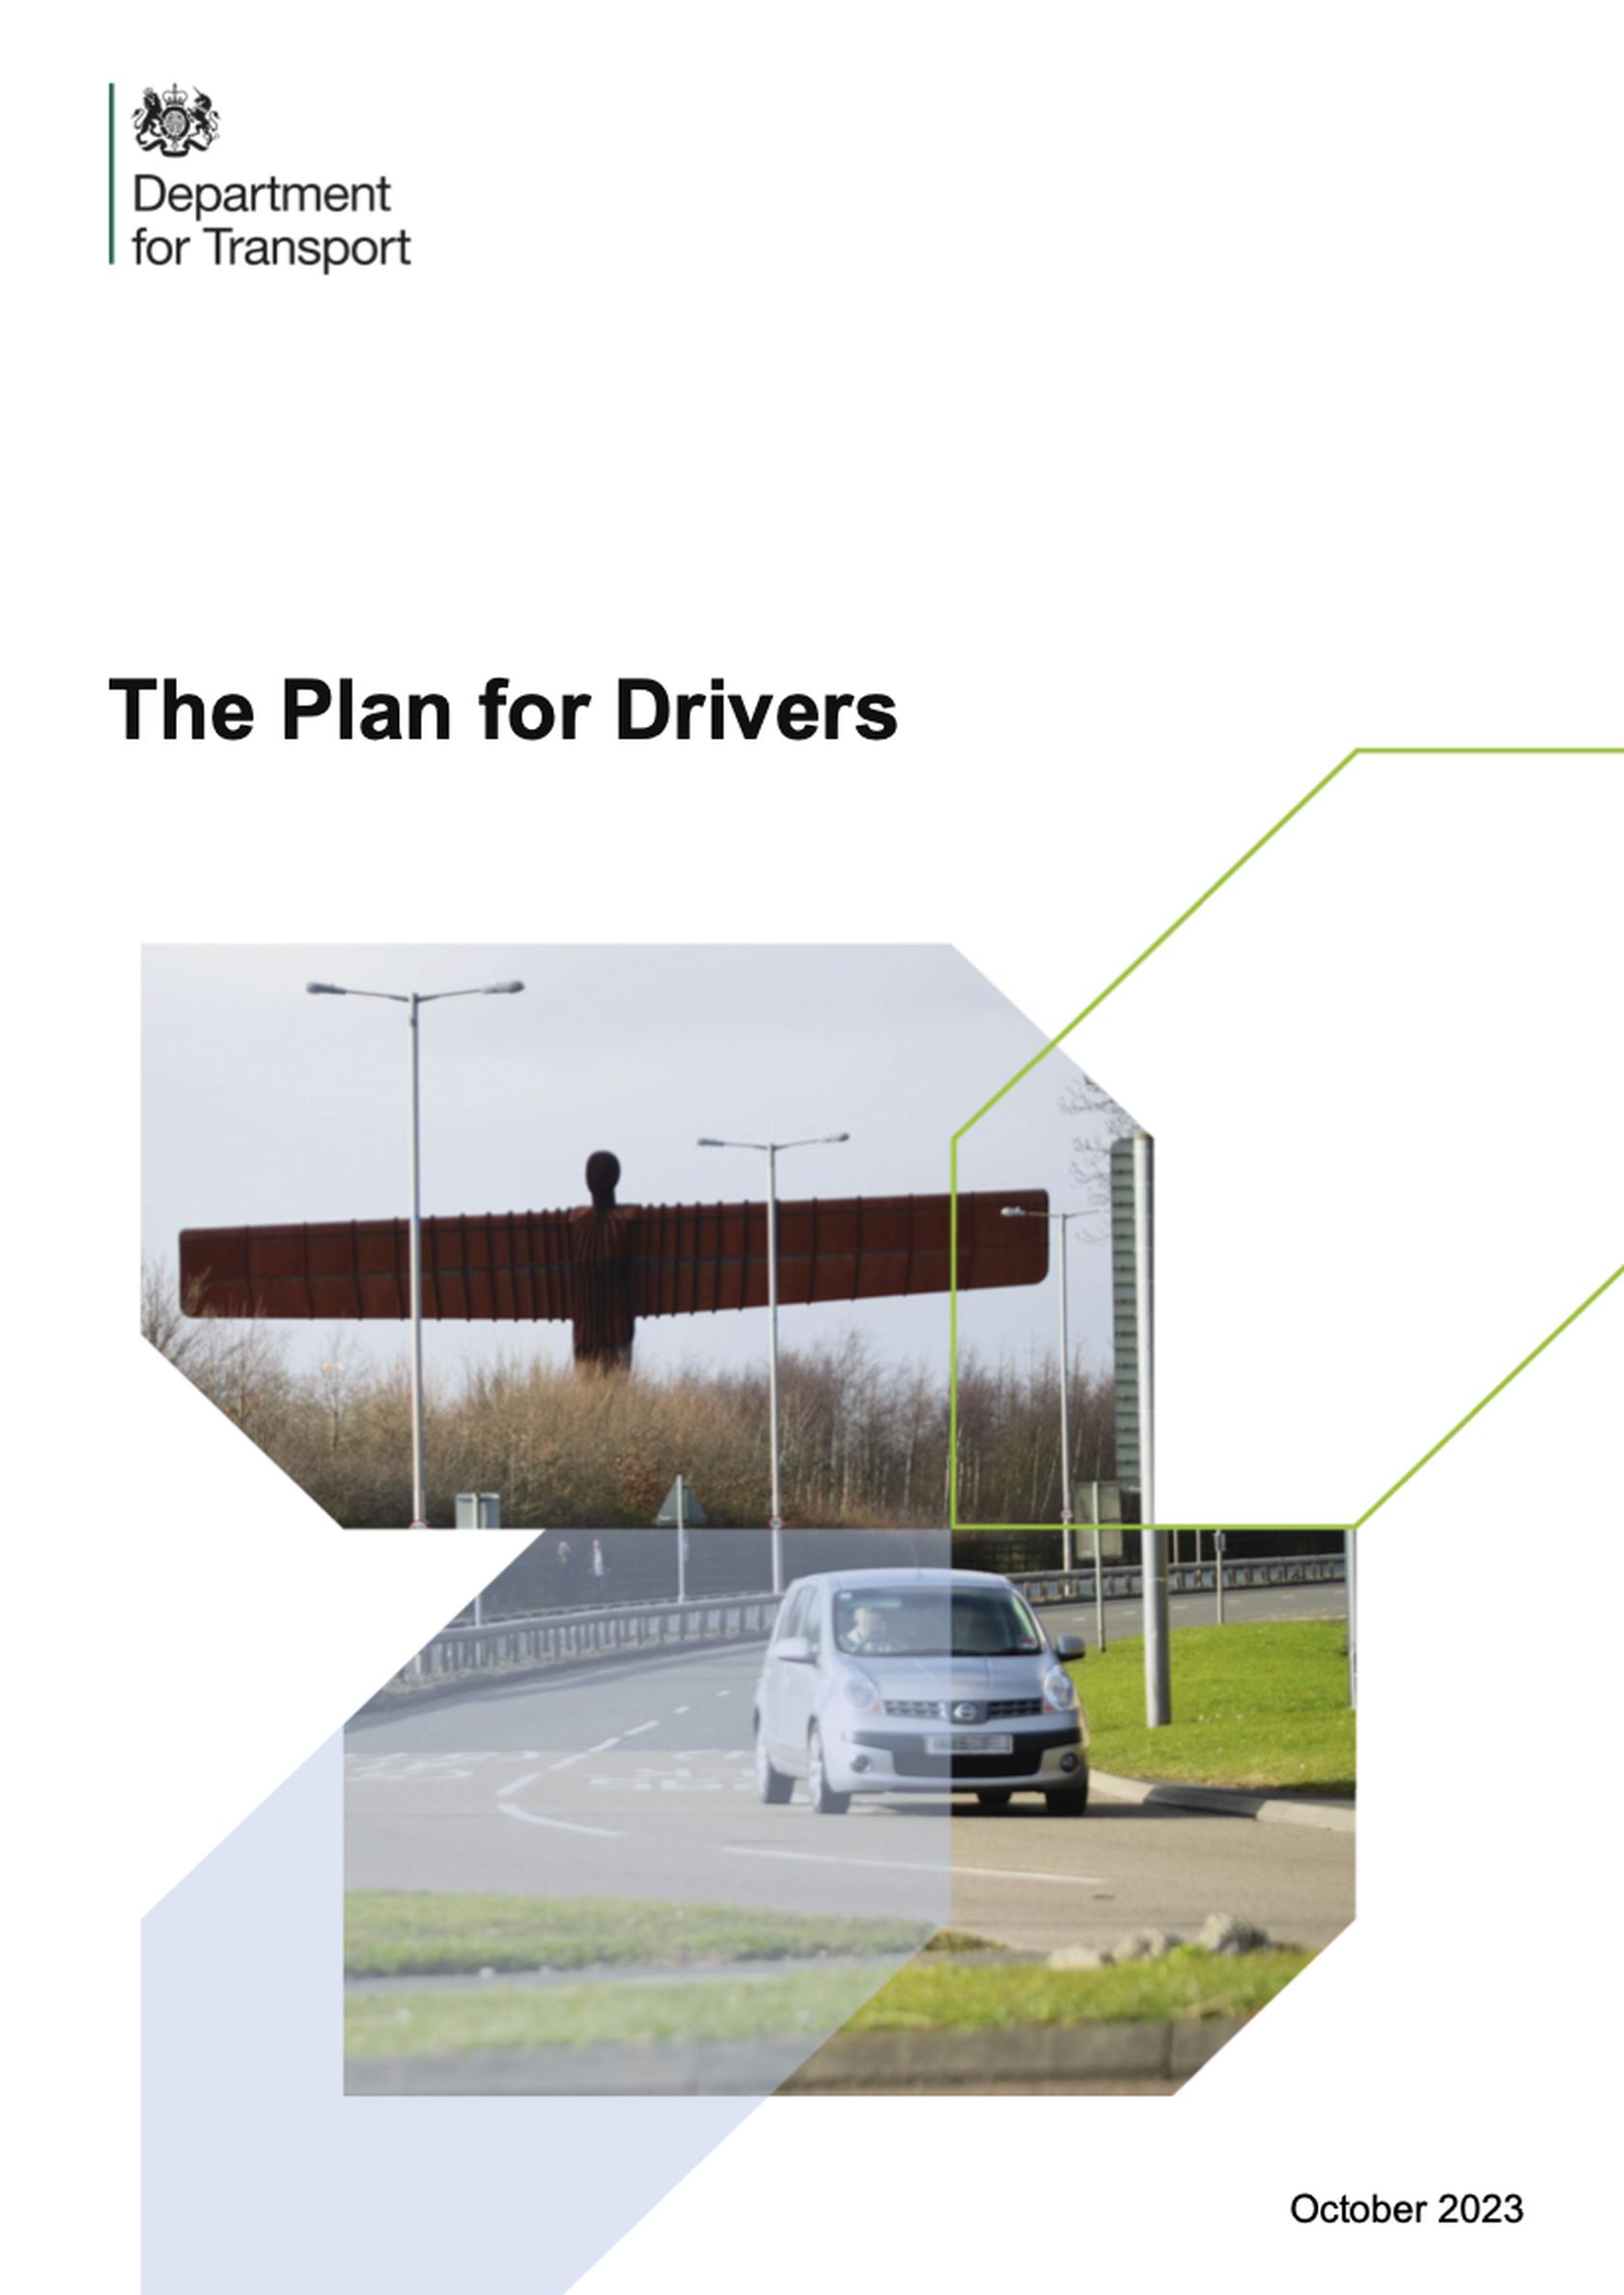 The Plan for Drivers